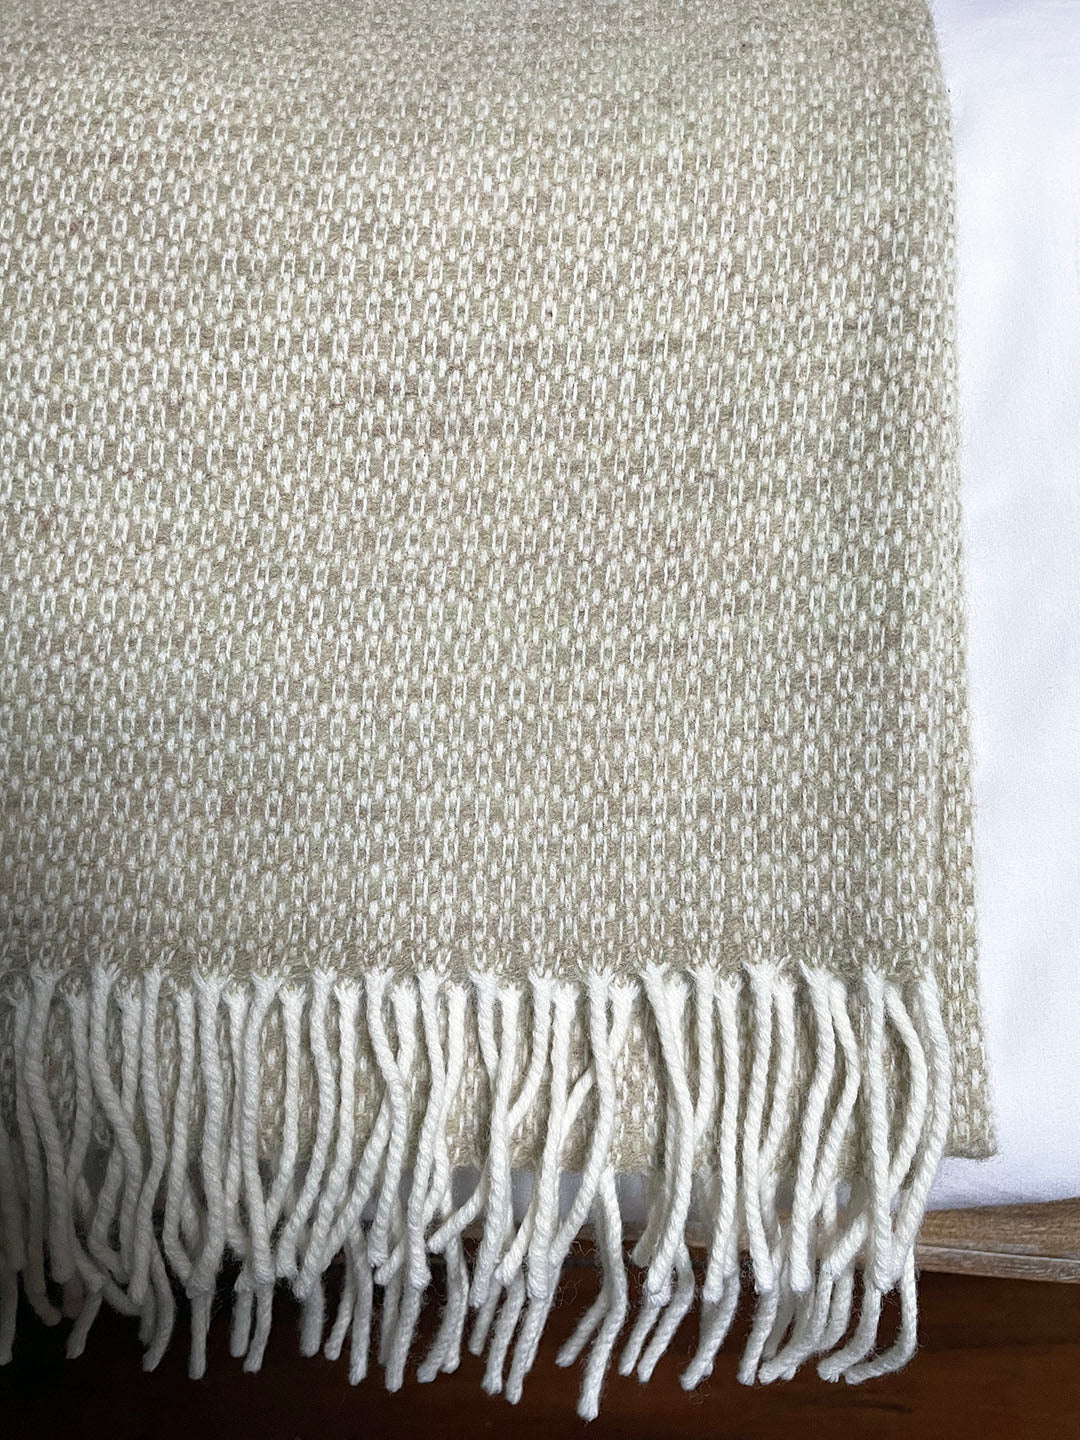 Generously sized pure merino lambswool throw woven in a delicate pattern in pale moss green and cream.